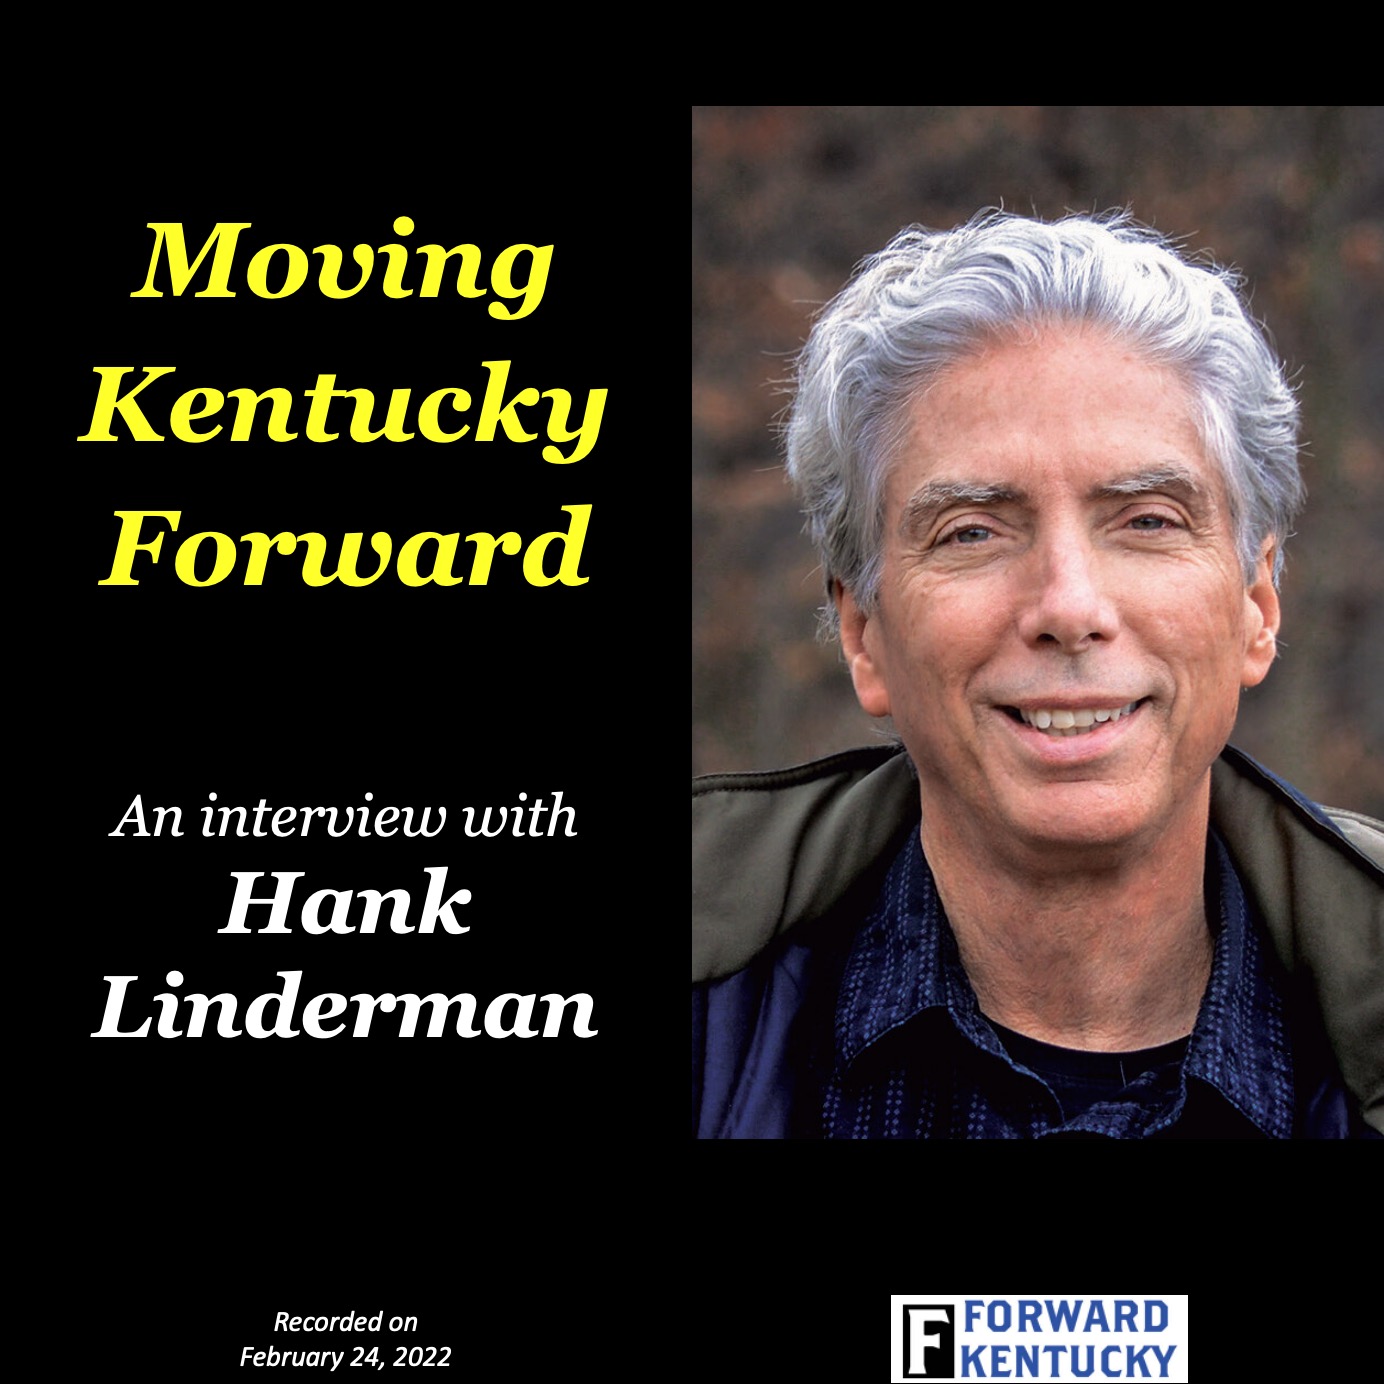 An Interview with Hank Linderman